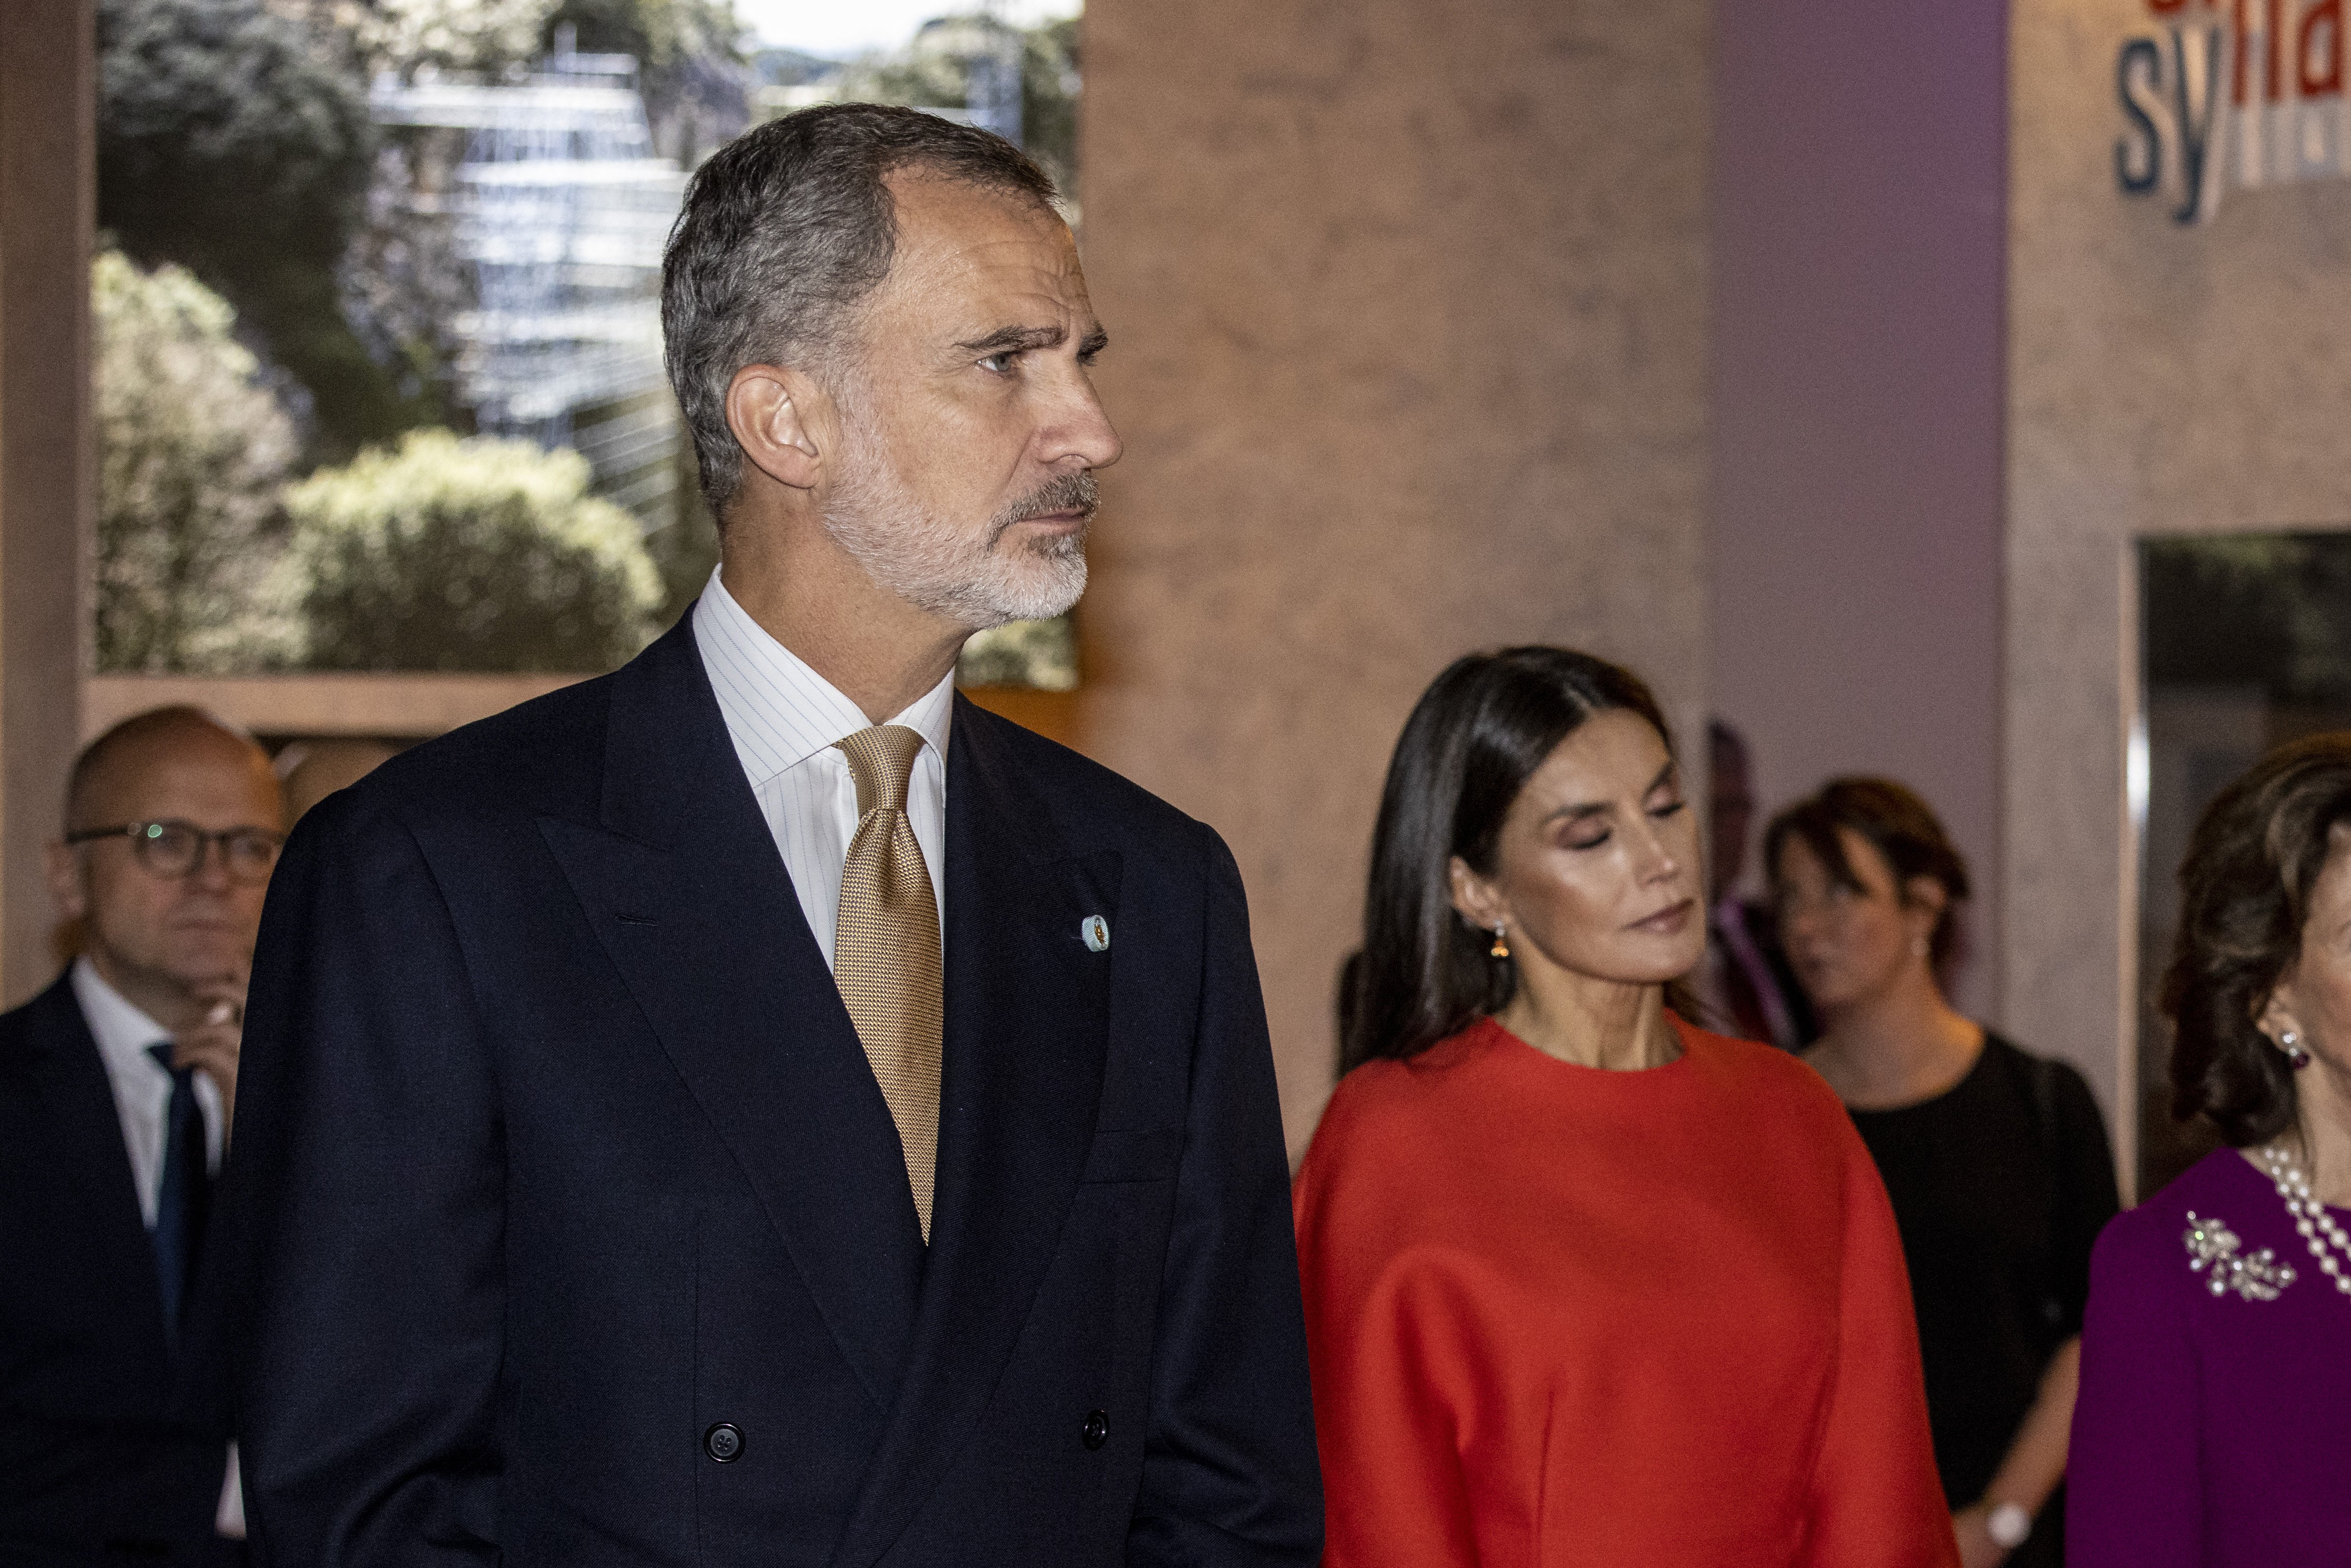 King Felipe VI and Queen Letizia of Spain visiting the Nobel Museum and the special exhibition on Santiago Ramon y Cajal on November 24, 2021 in Stockholm, Sweden. | Source: Getty Images